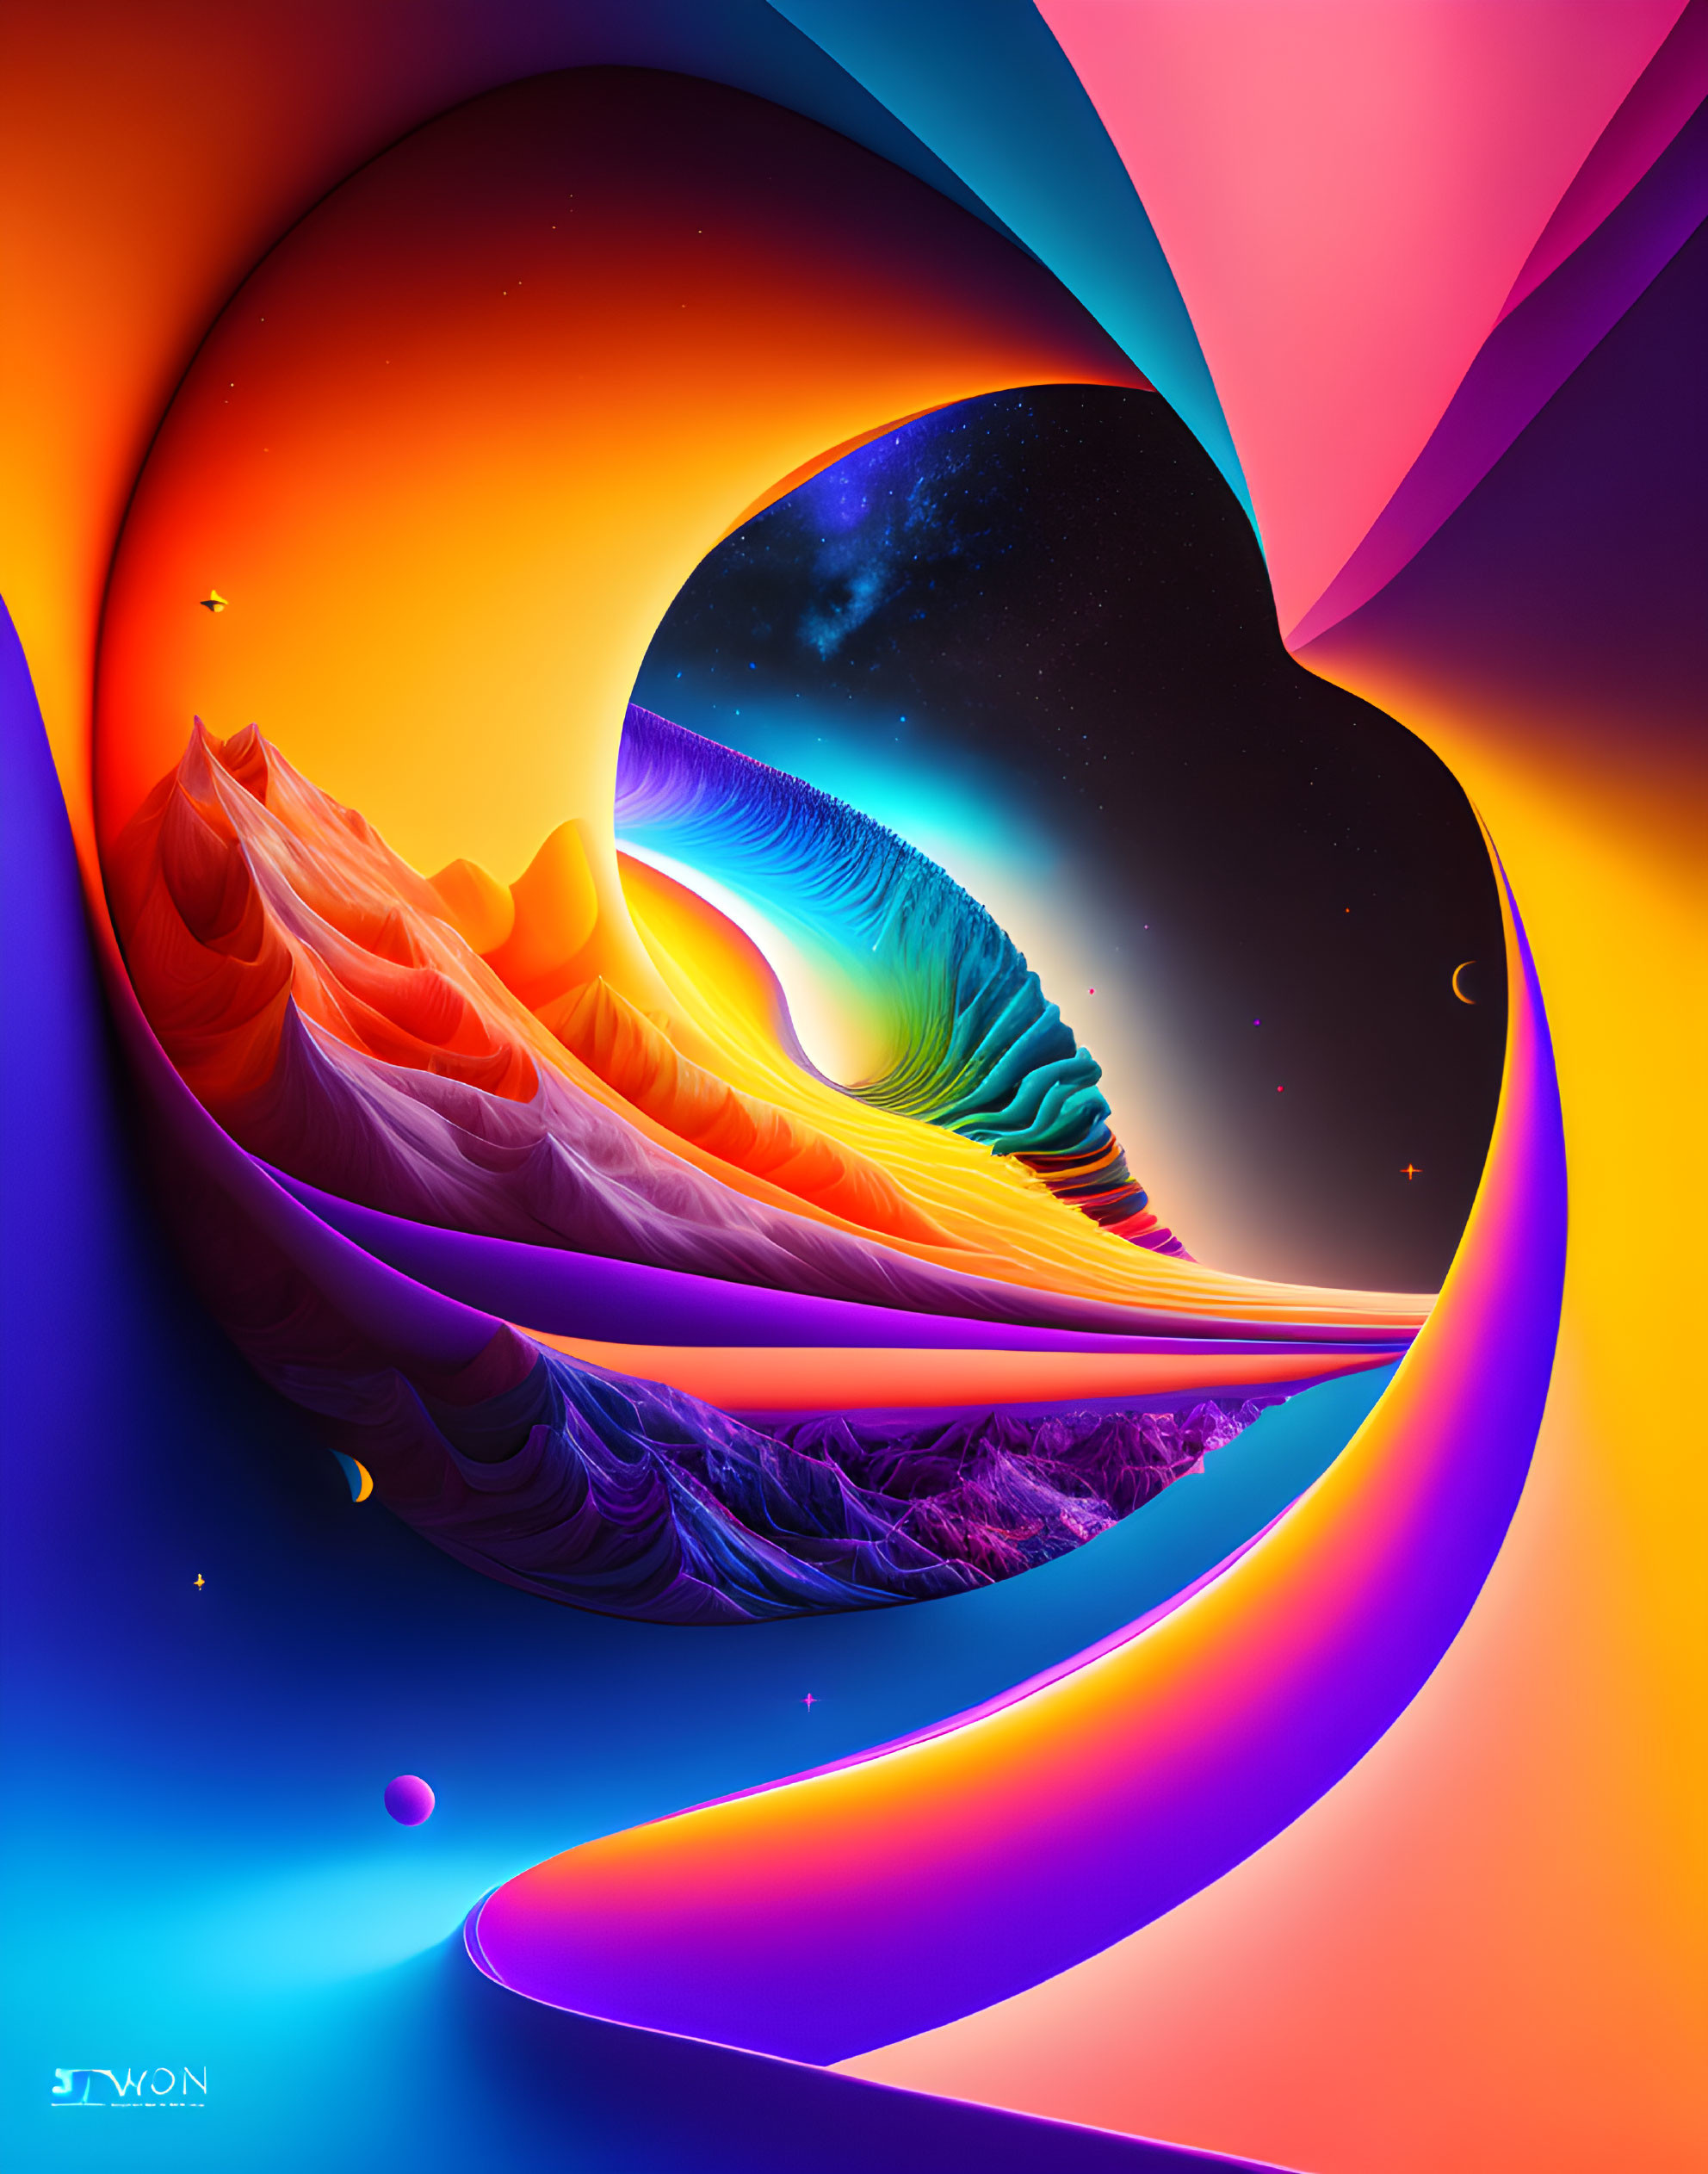 Colorful Abstract Landscape with Swirling Shapes and Cosmic Backdrop